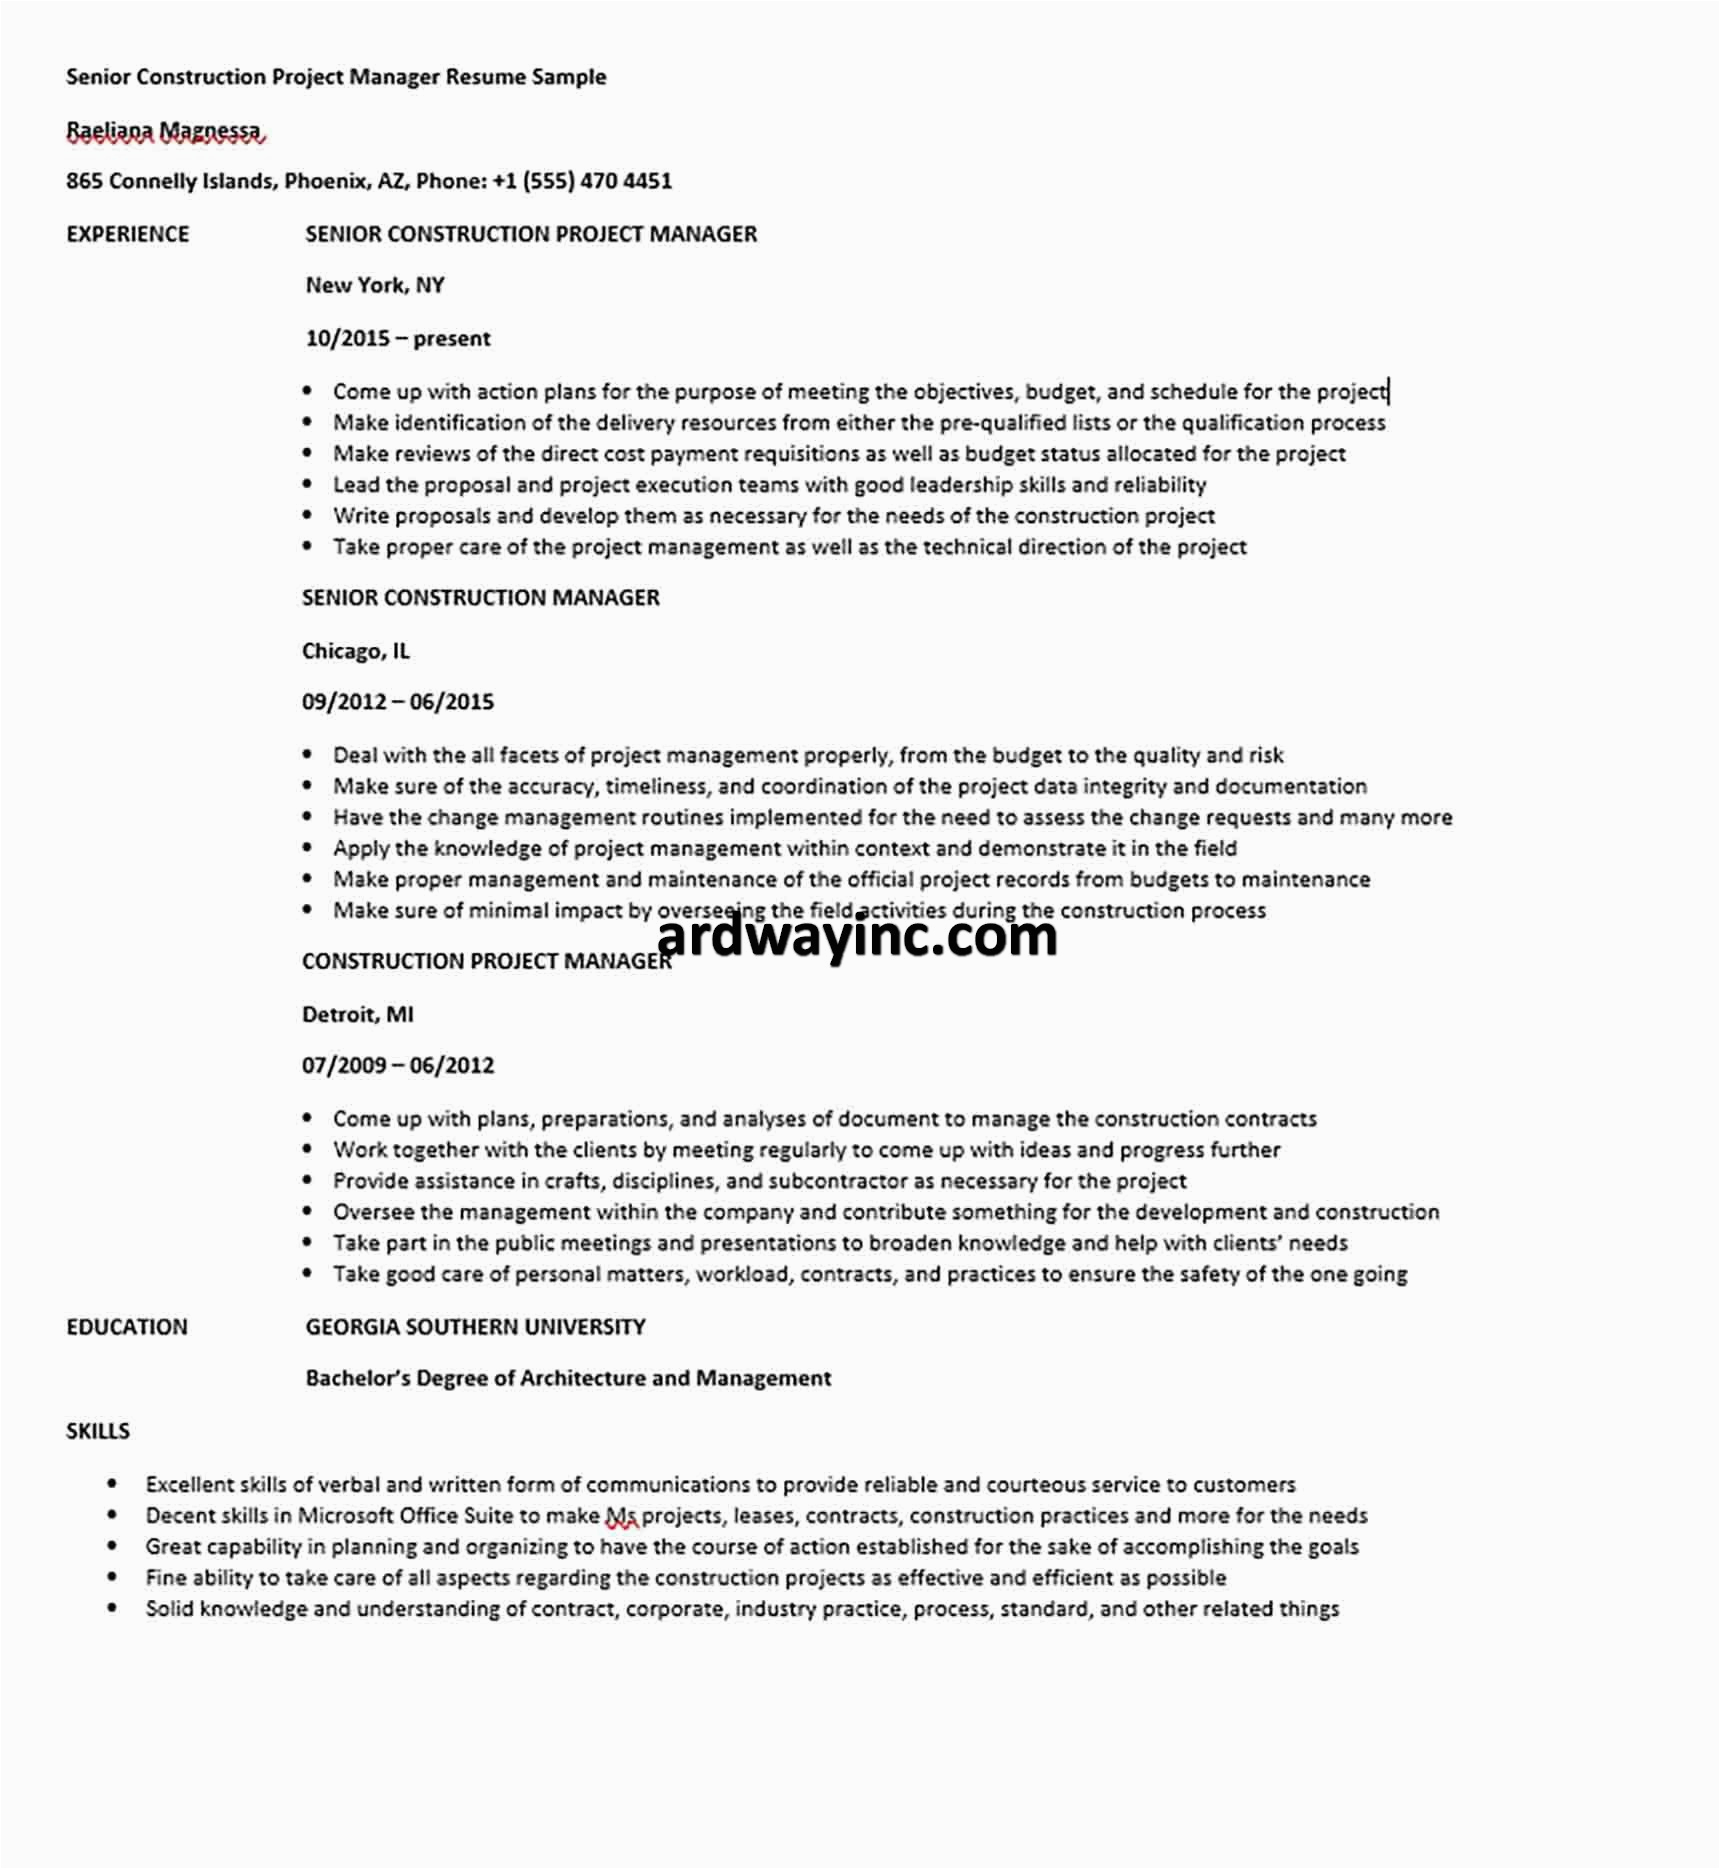 Senior Construction Project Manager Resume Samples Senior Construction Project Manager Resume Sample